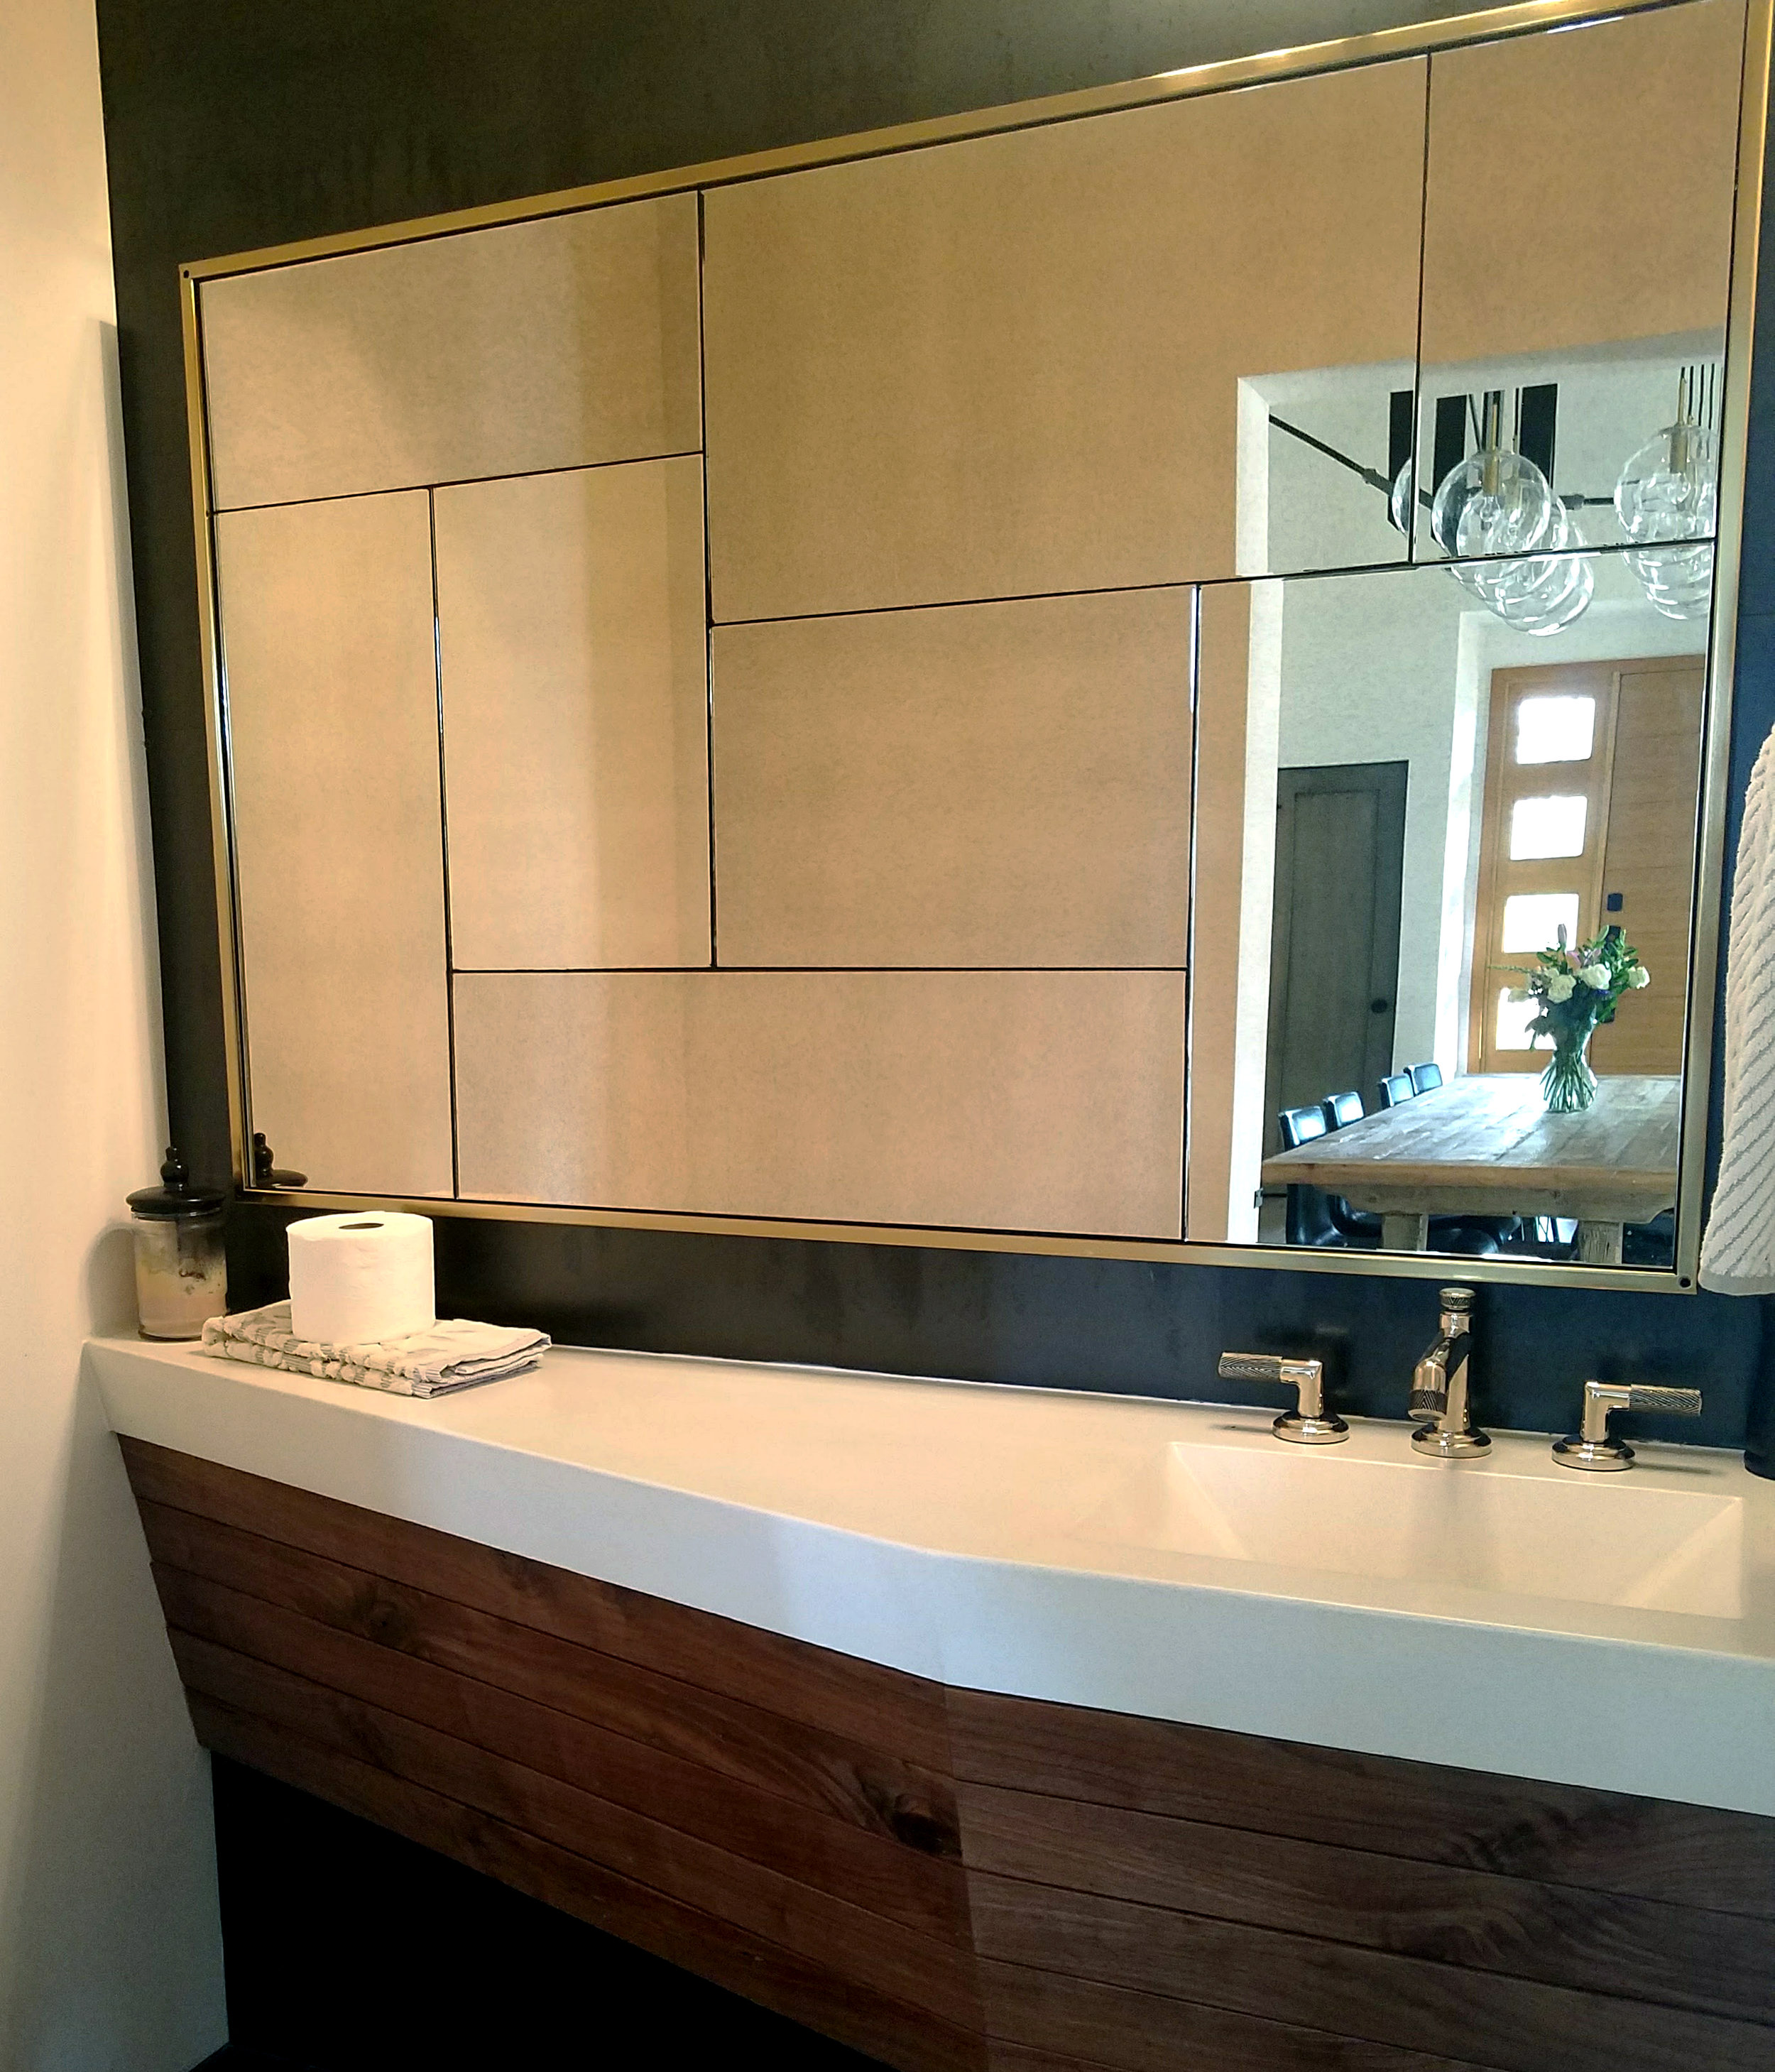 Floating Concrete Vanity Sink with Rustic Walnut Front.jpg